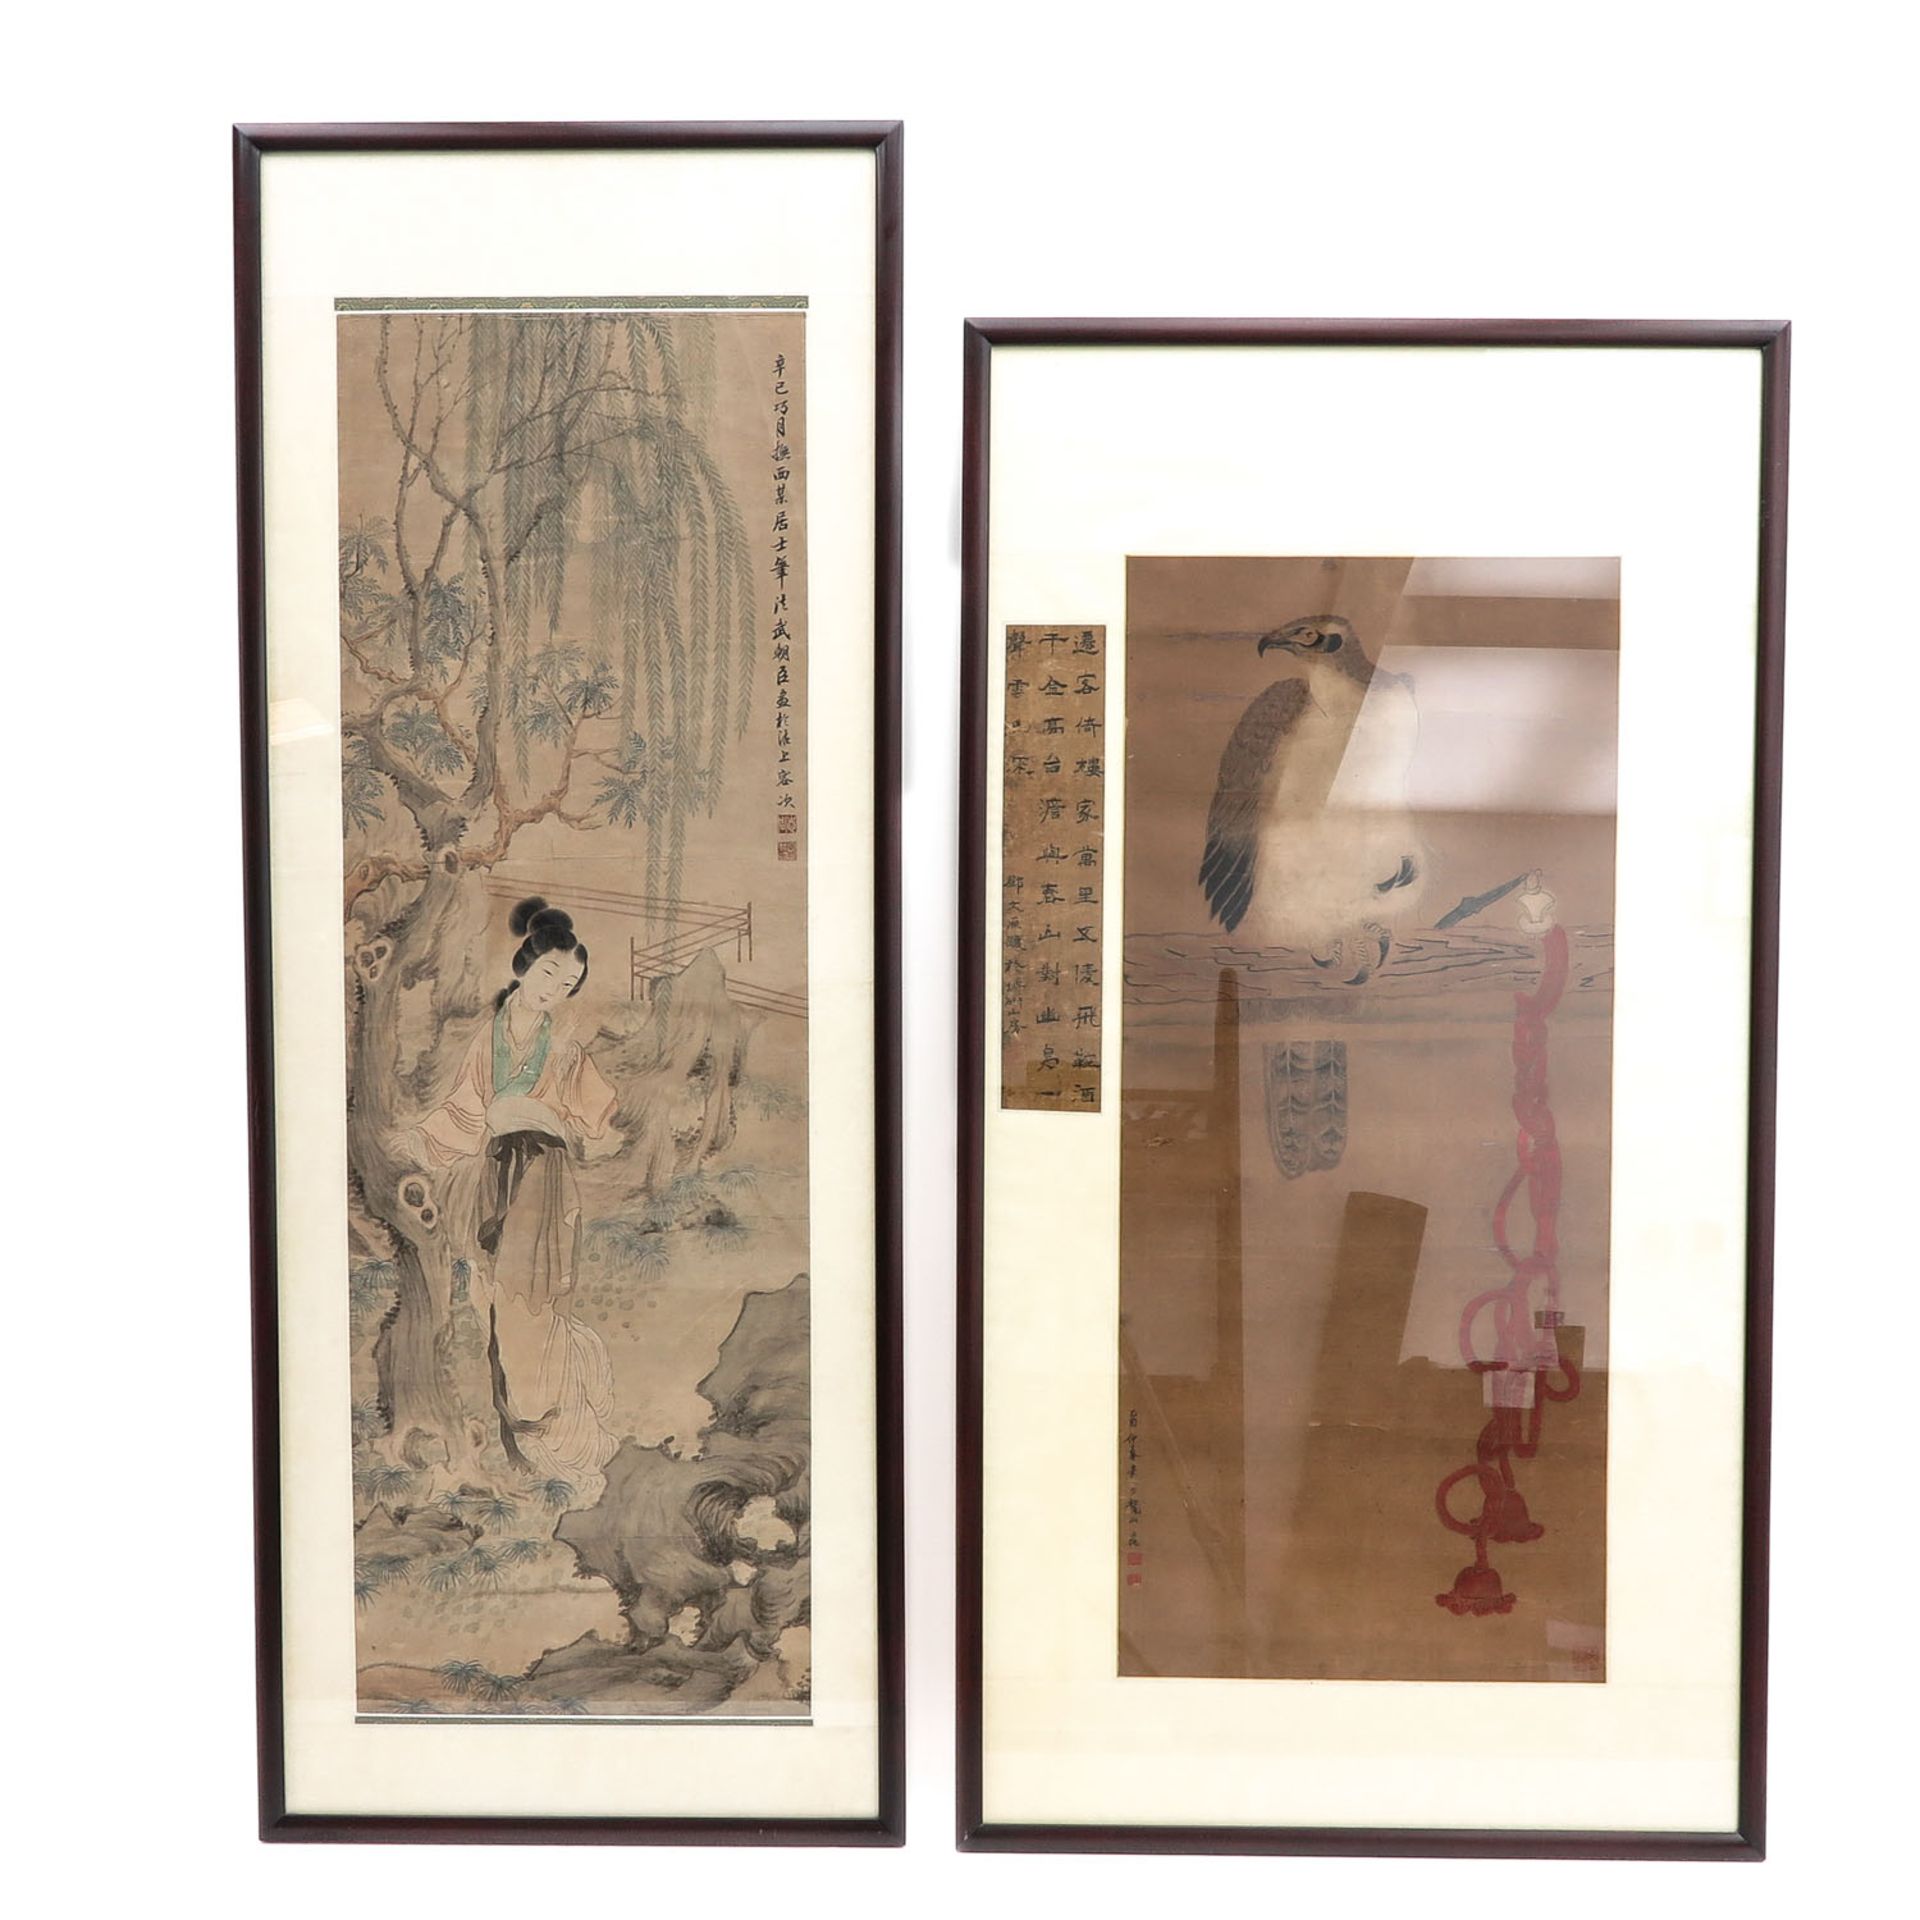 A Lot of 2 Chinese Works of Art